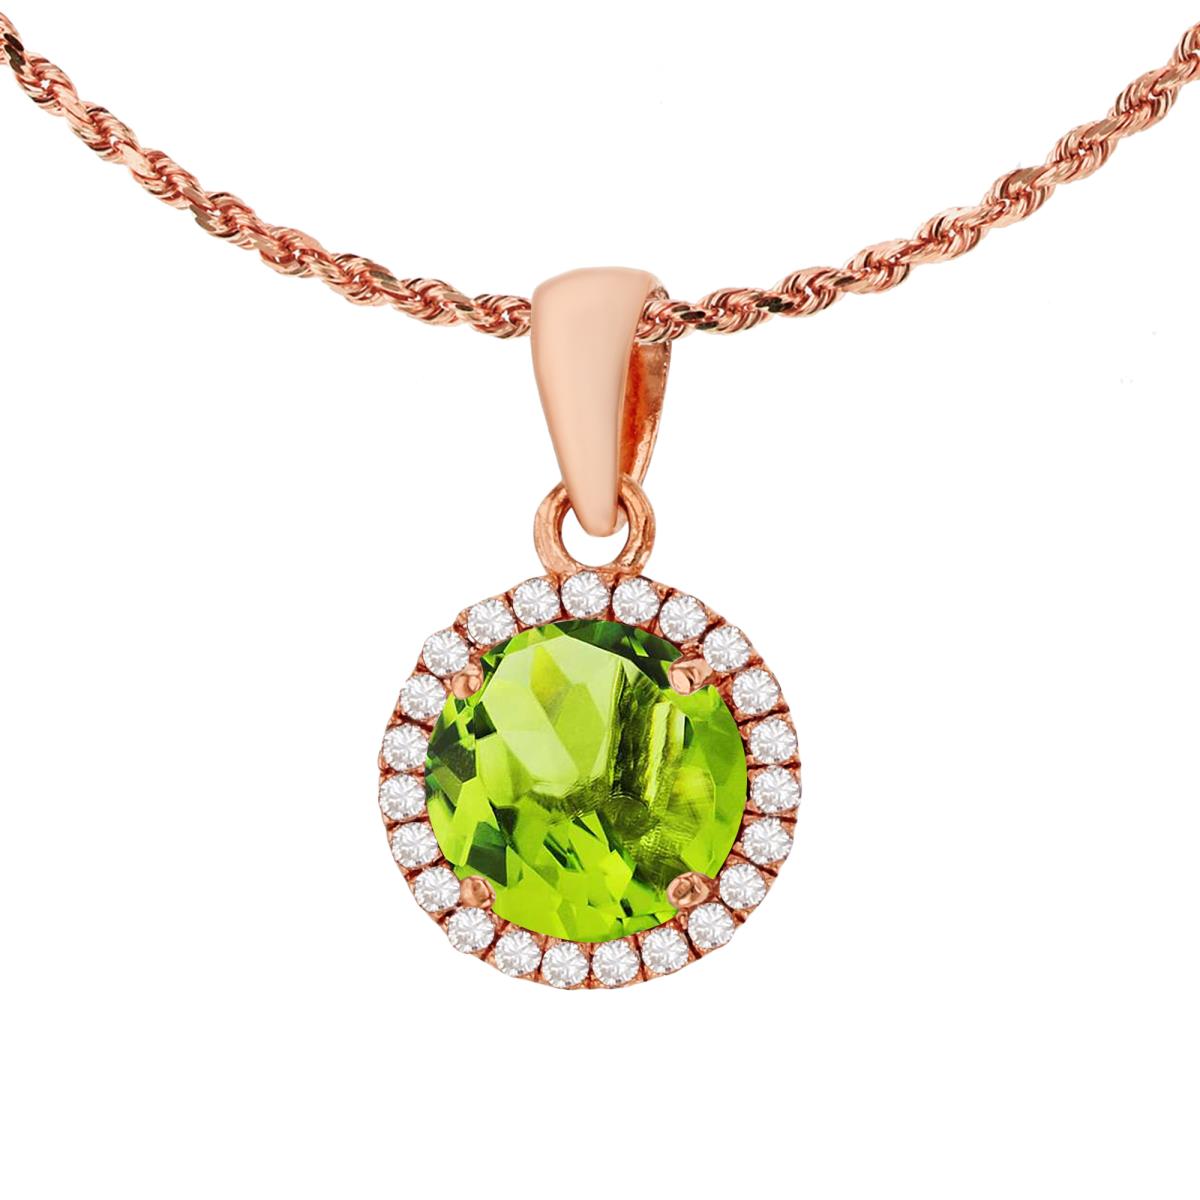 10K Rose Gold 7mm Round Peridot & 0.12 CTTW Diamond Halo 18" Rope Chain Necklace